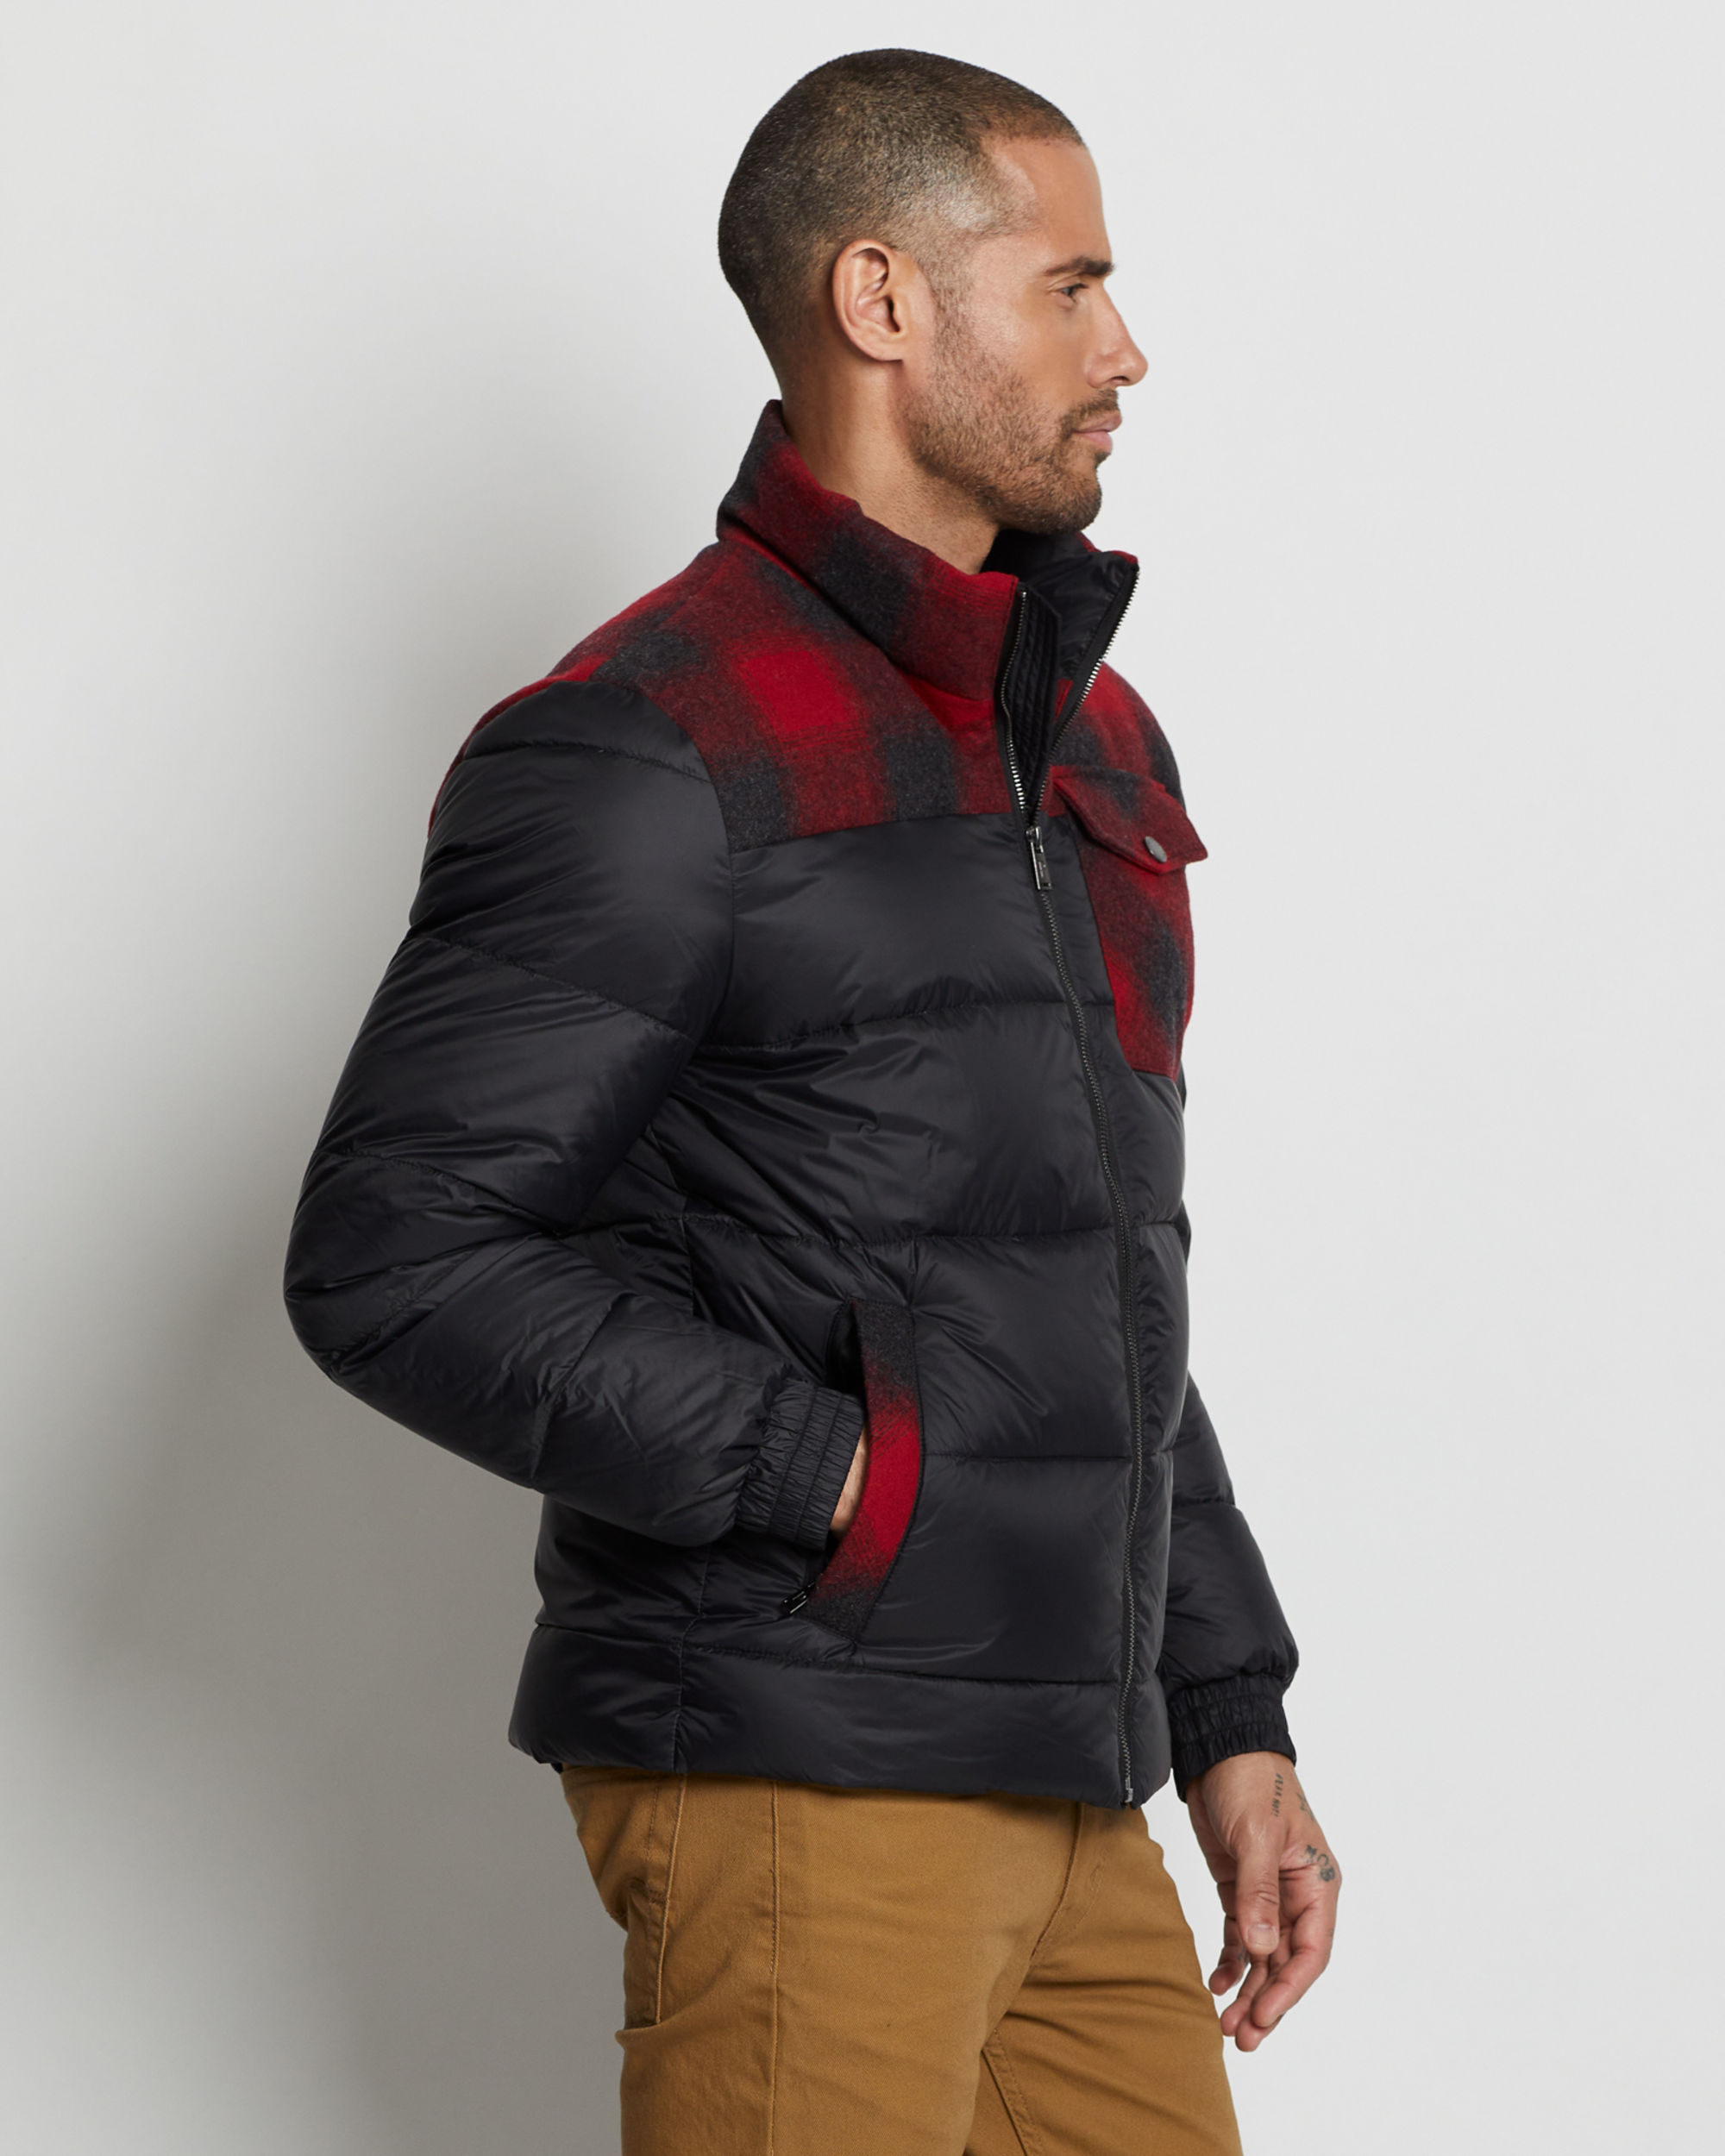 Stay Warm & Stylish with Grizzly Peak Puffer | Pendleton